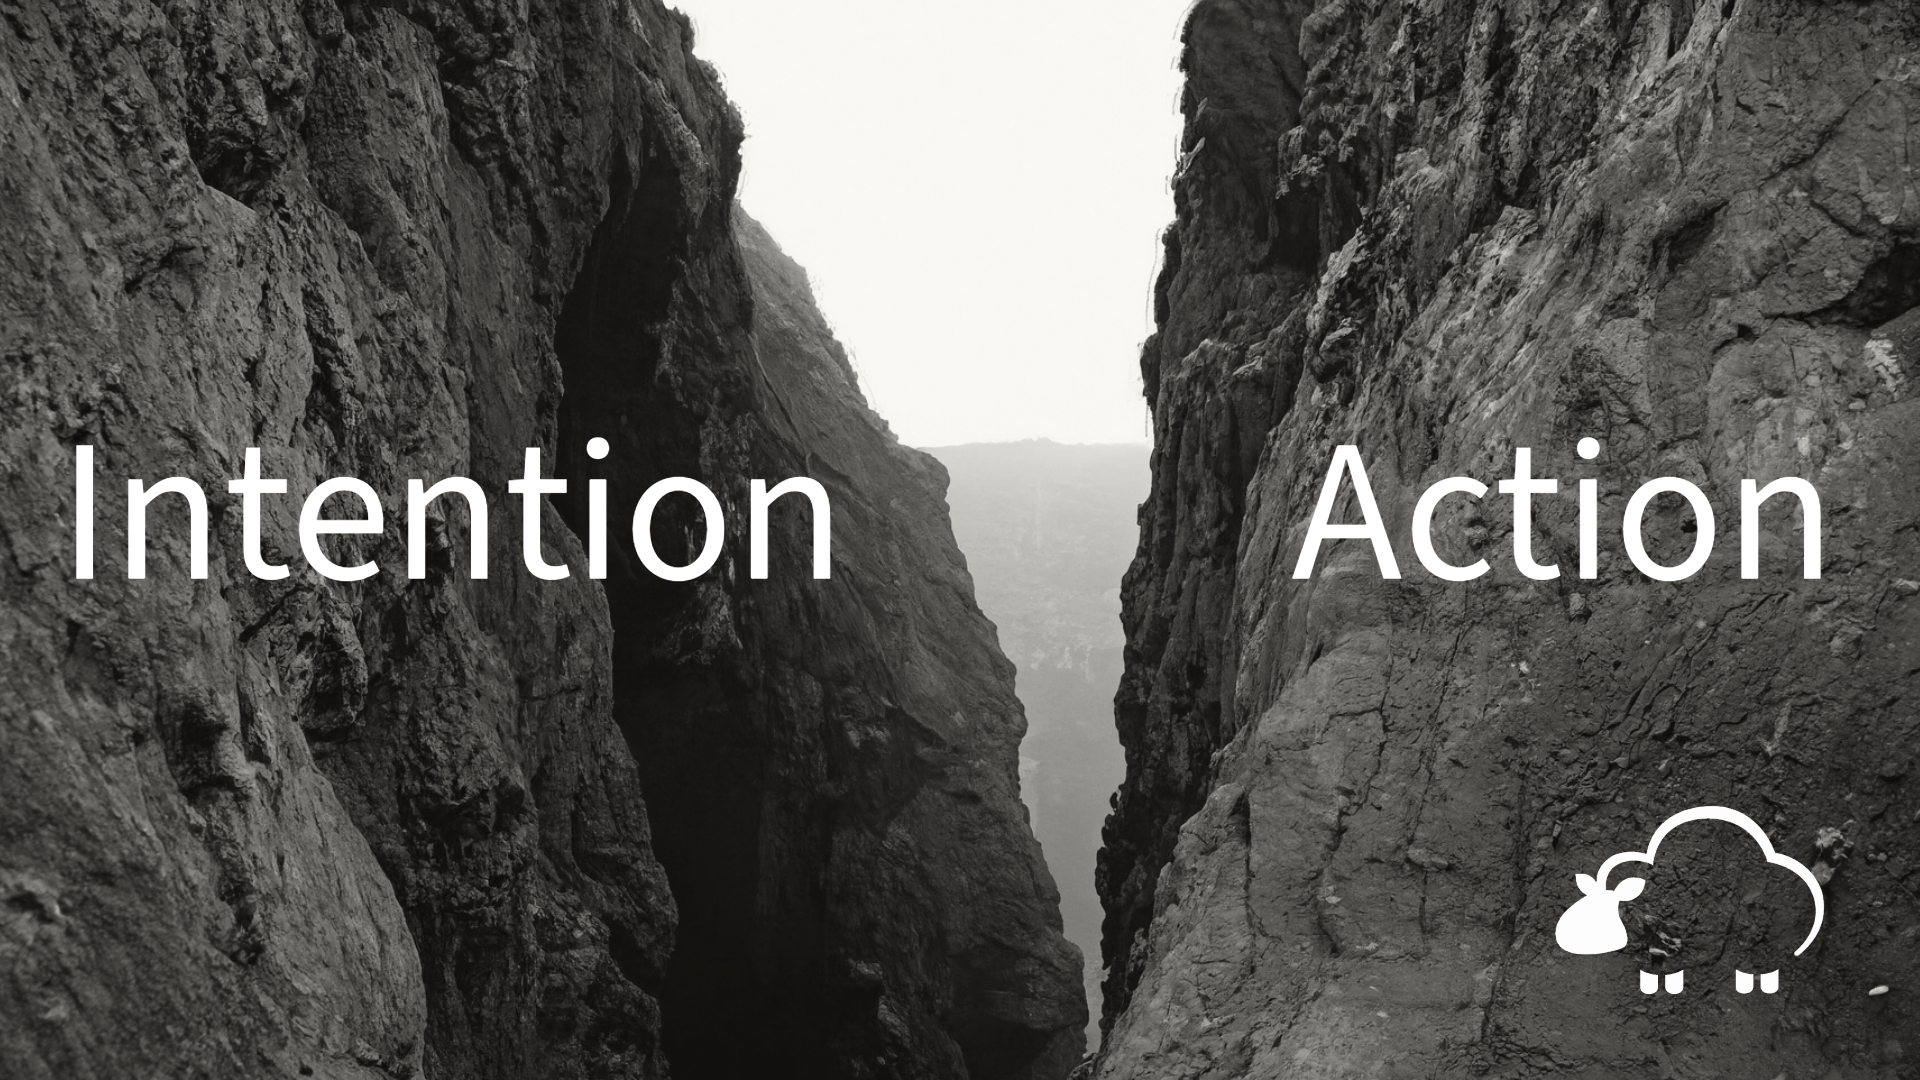 The gap between intention and action